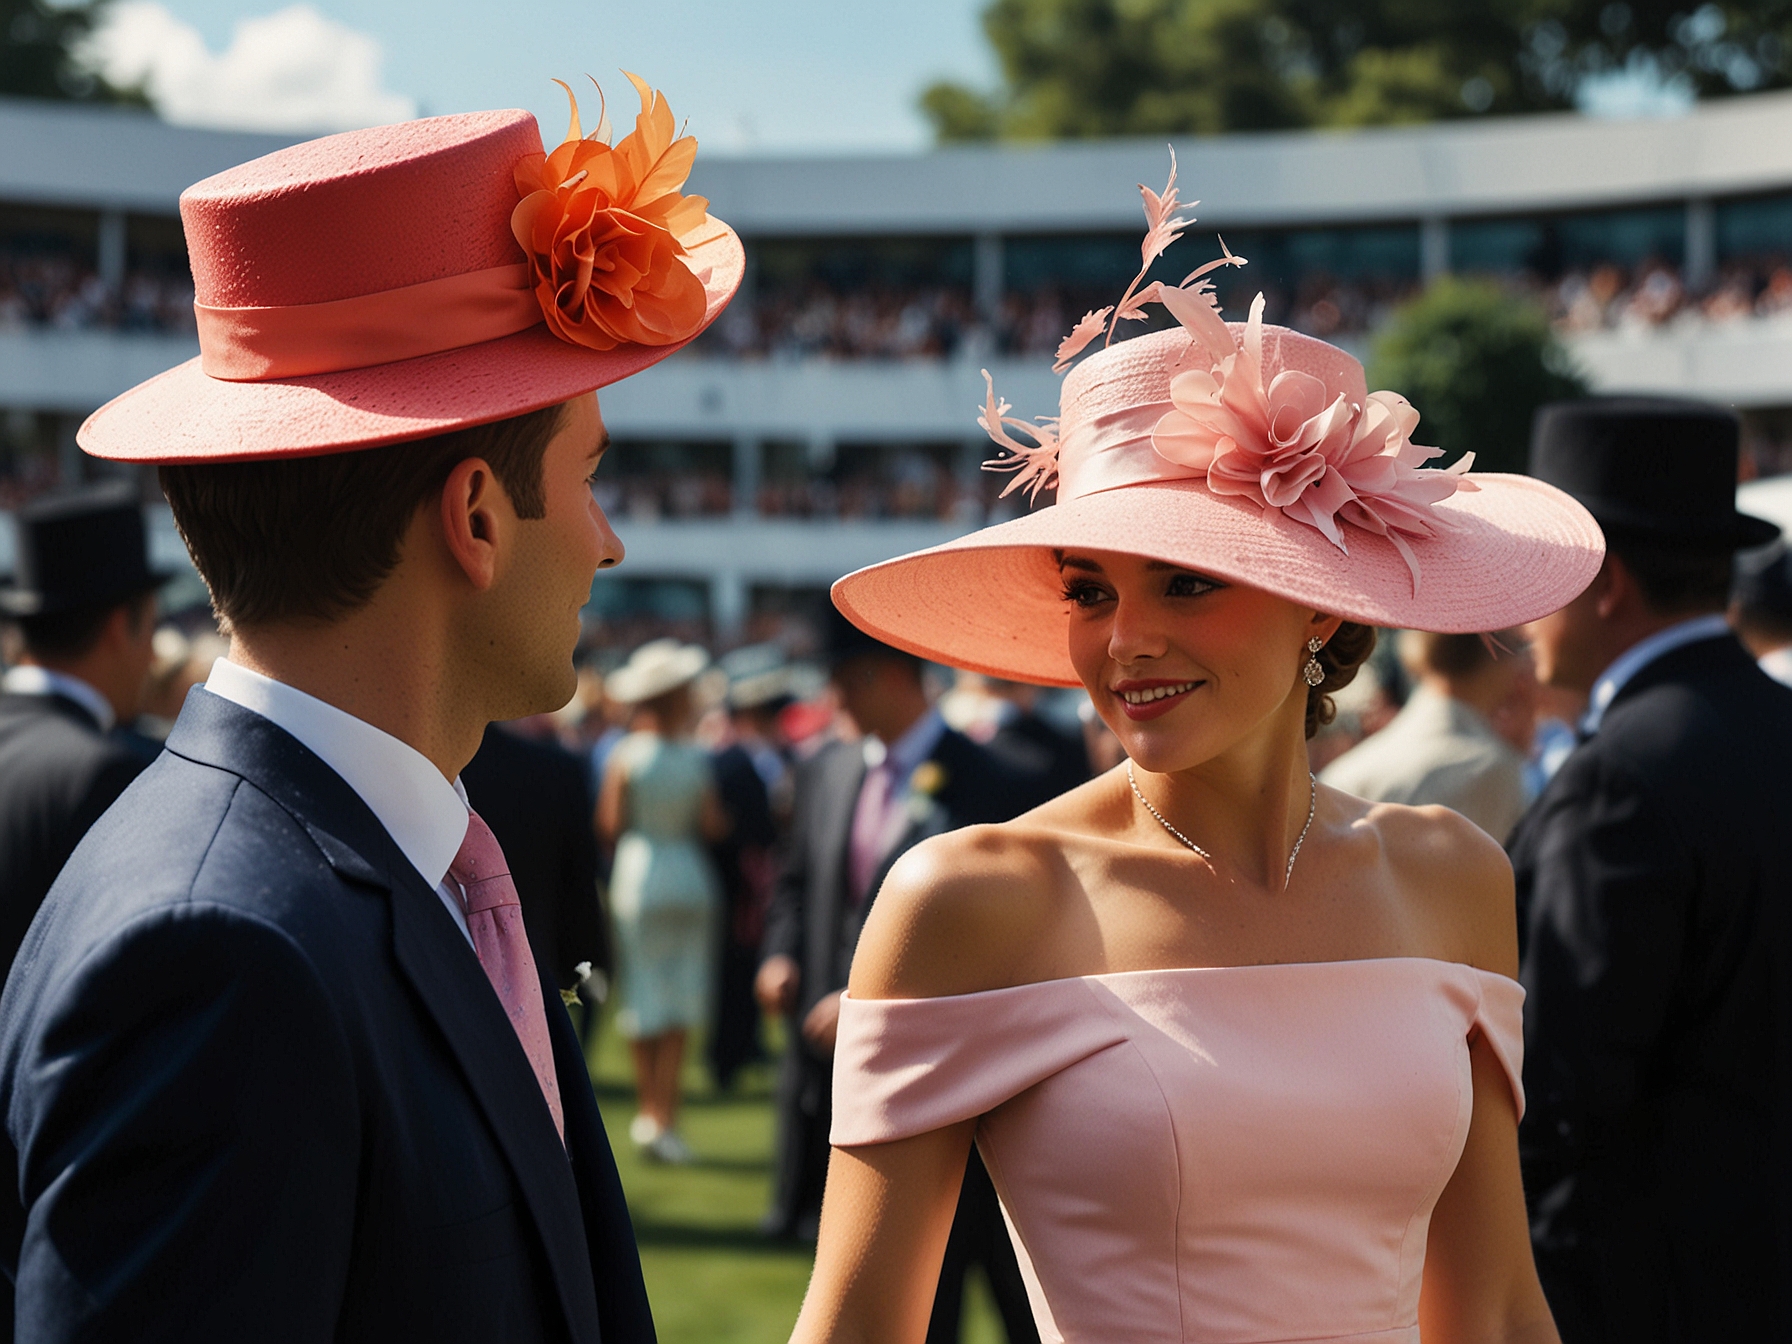 A vibrant depiction of Ladies' Day at Royal Ascot, showcasing attendees adorned in flamboyant hats and chic outfits. The scene captures the essence of fashion and elegance that defines the event.